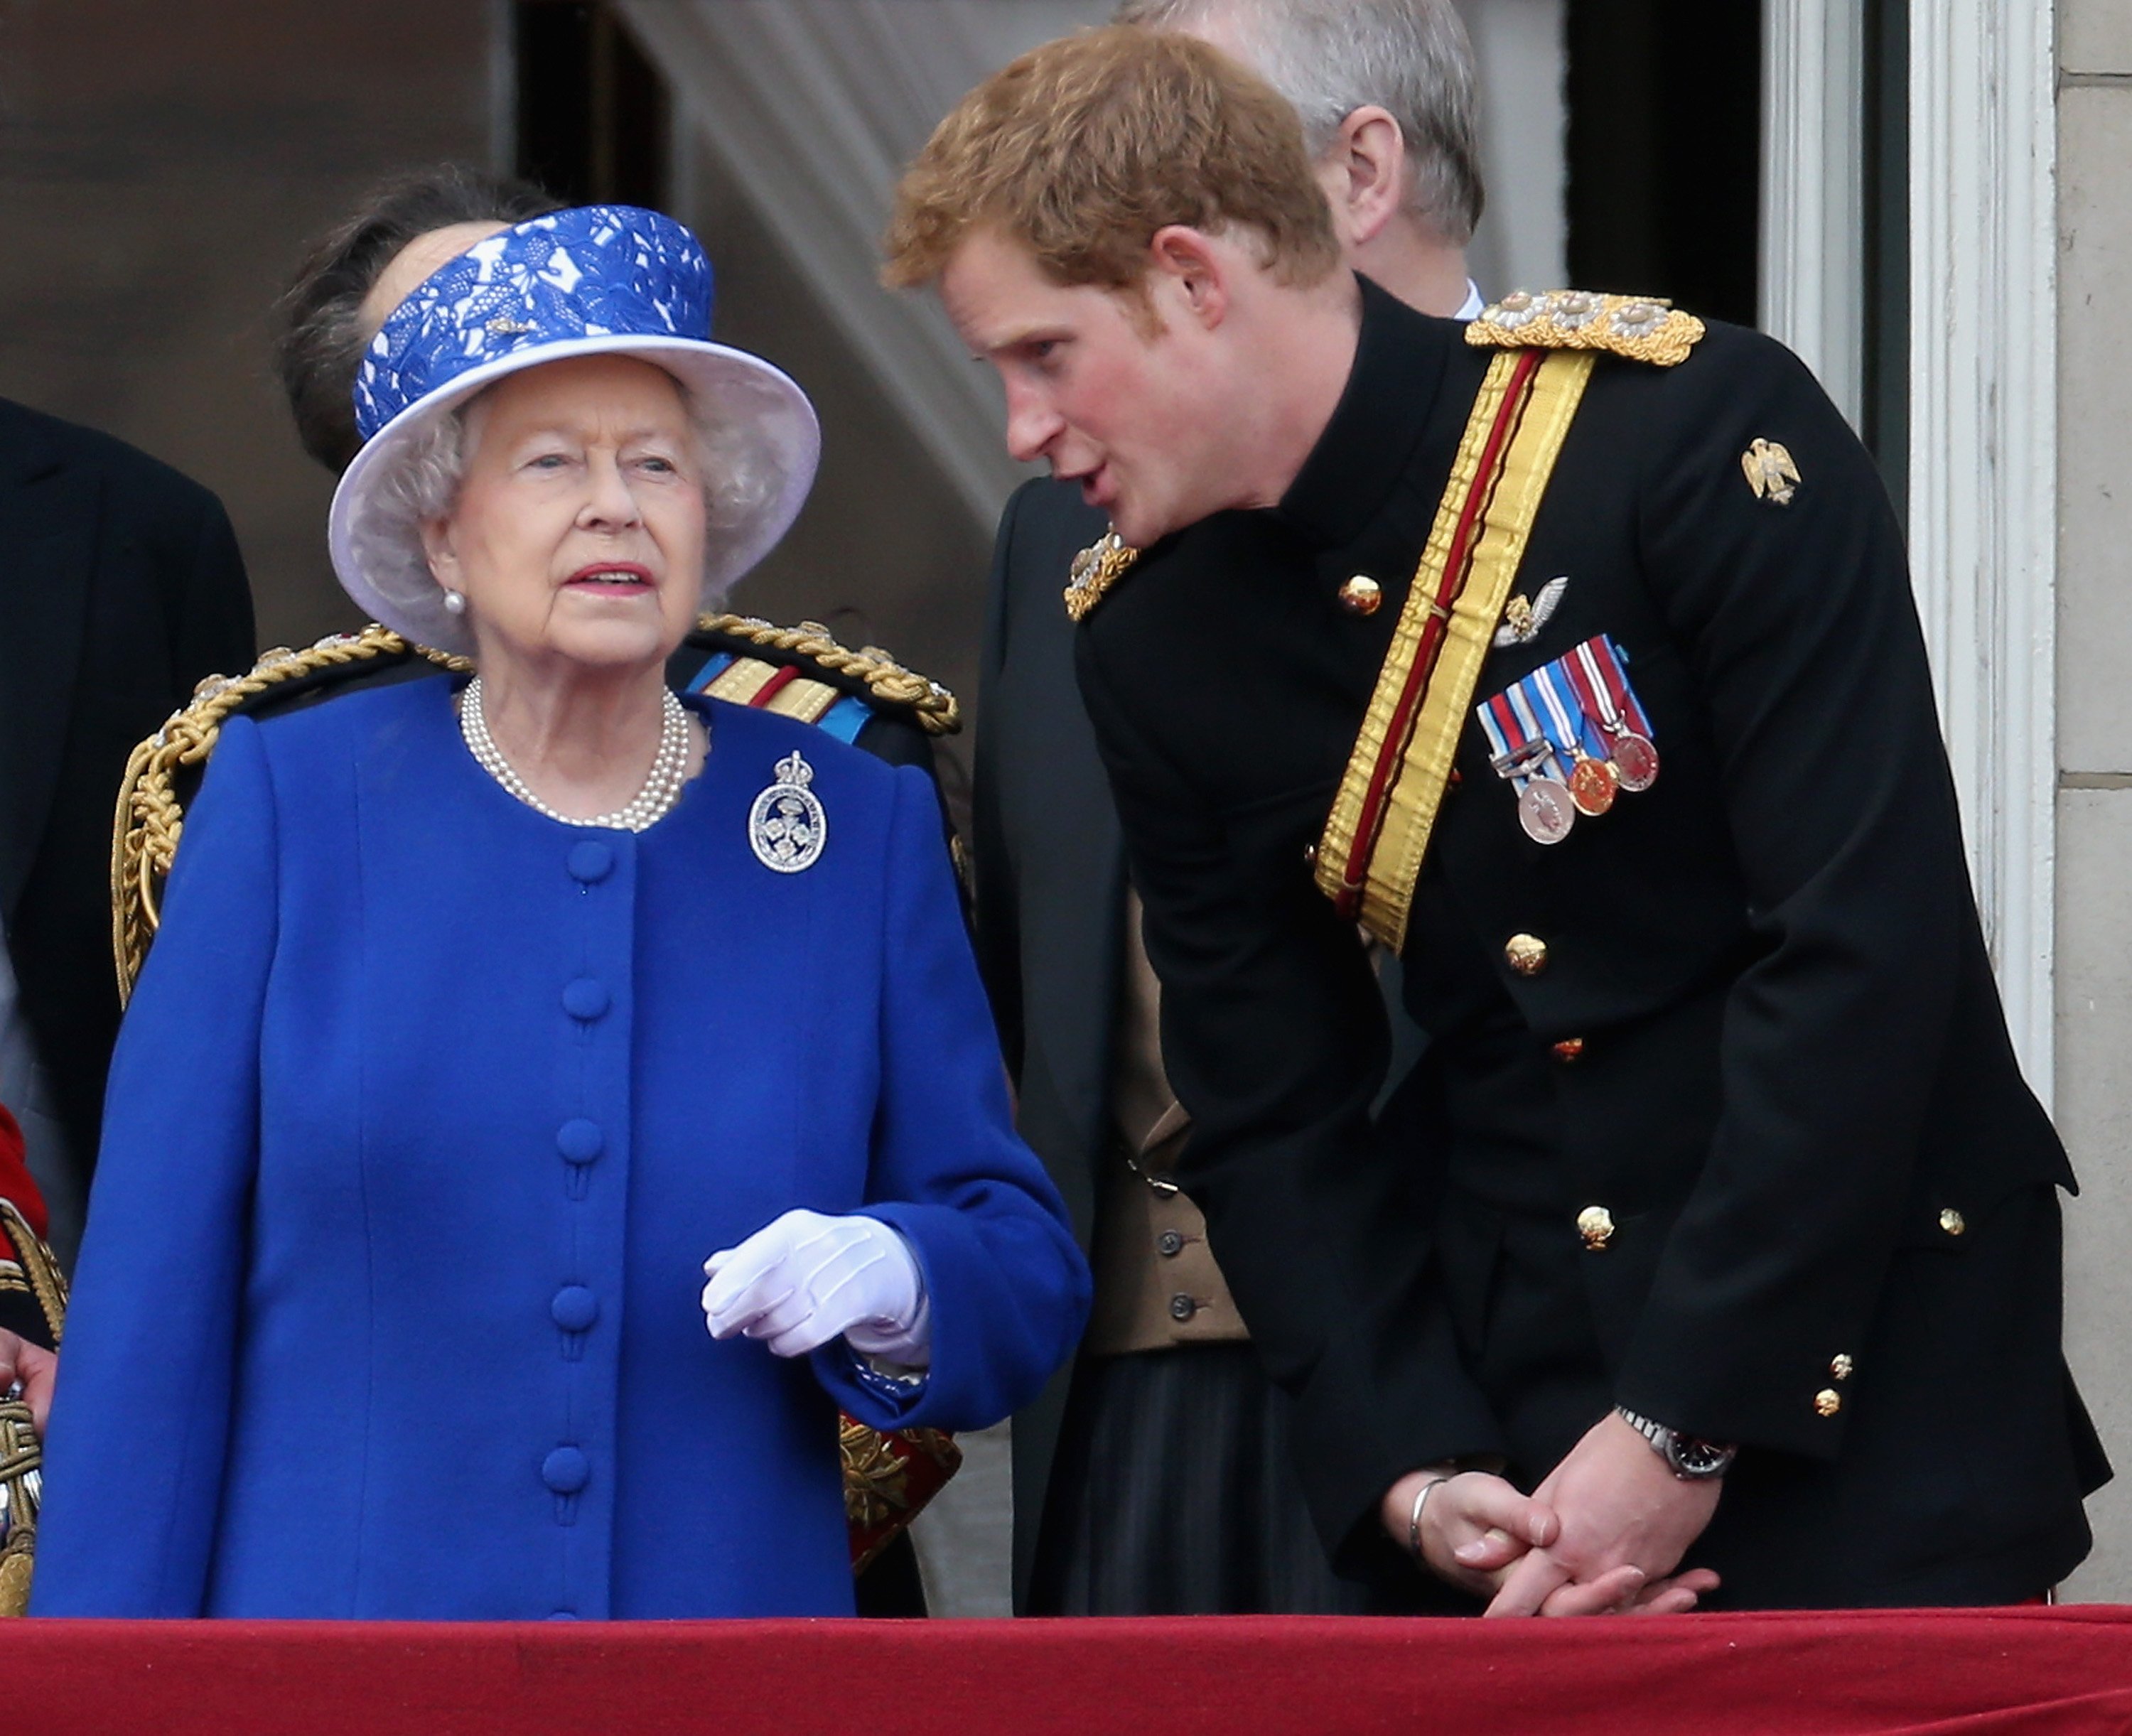 Prince Harry and Queen Elizabeth ii in London 2013. | Source: Getty Images